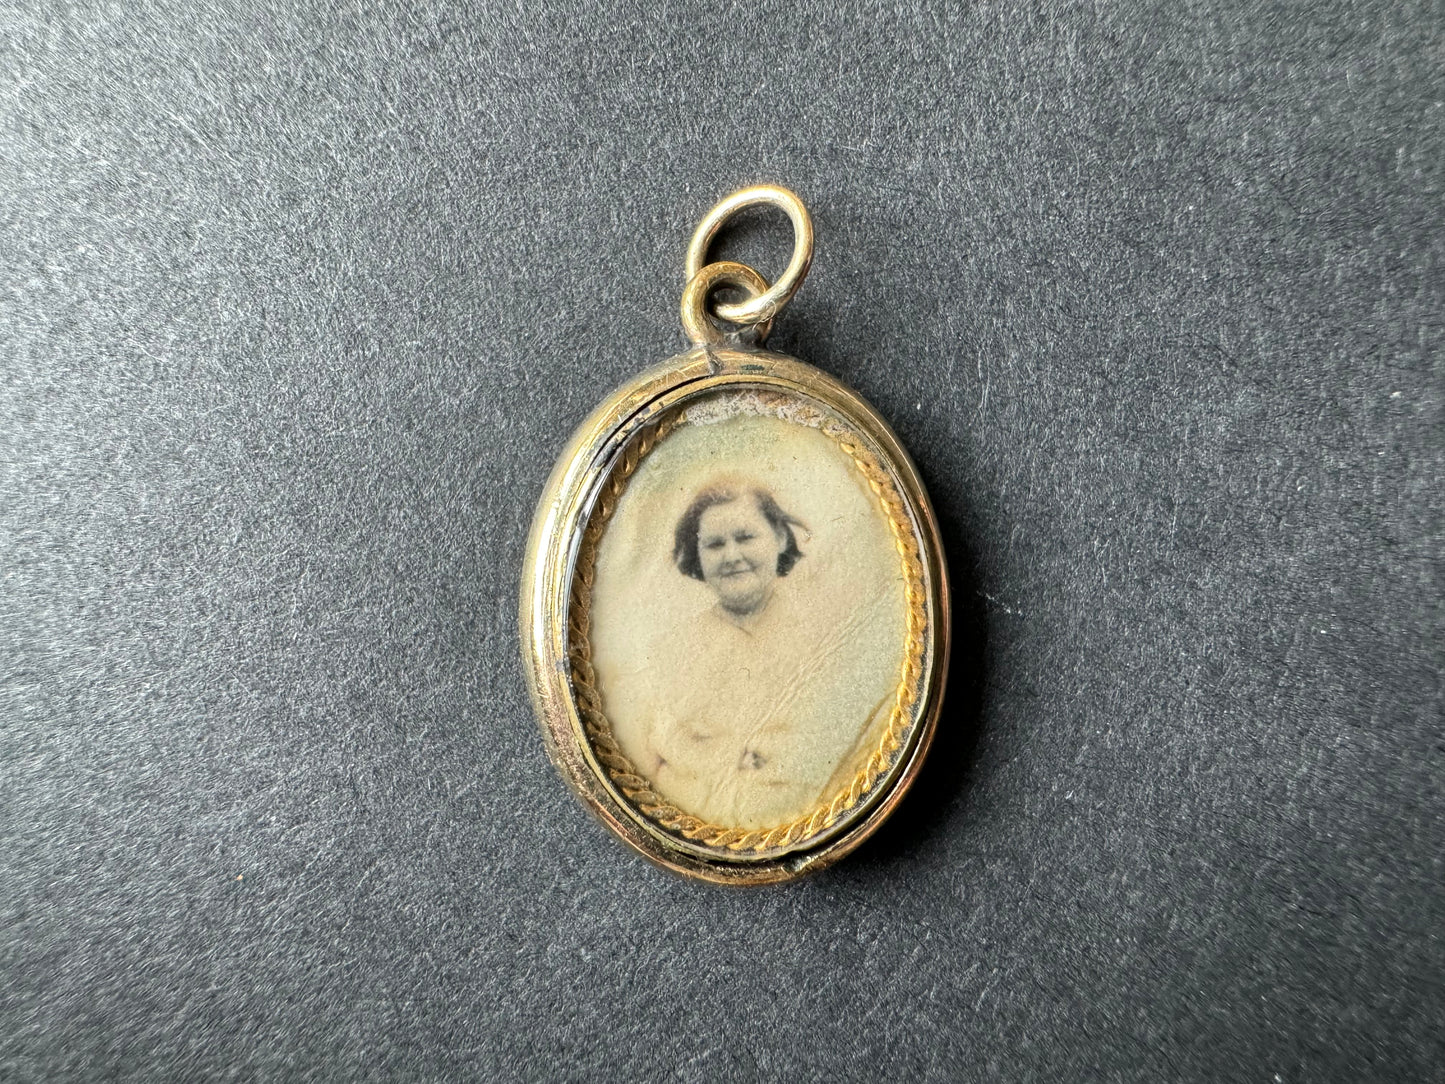 9k Turquoise Locket with Photograph Circa 1910